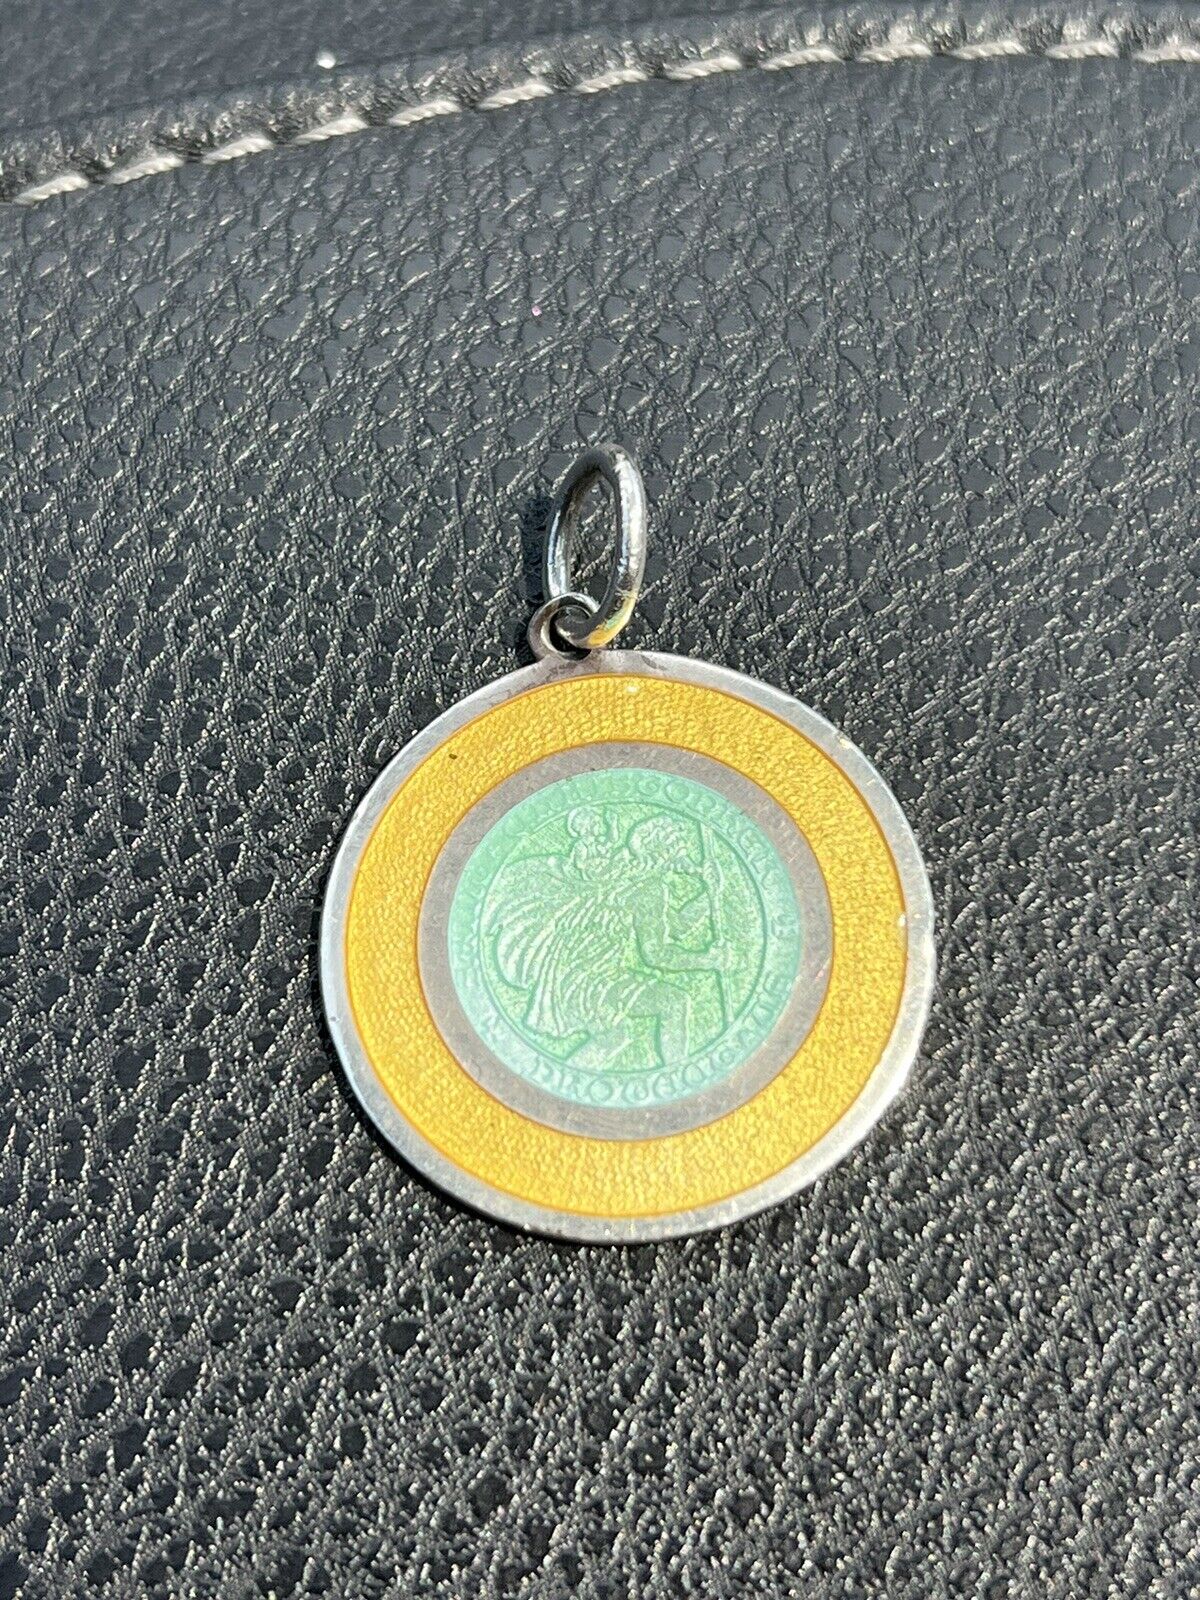 Saint Christopher Yellow Light Green Enamel Sterling Silver Pendant 1.5 Inches